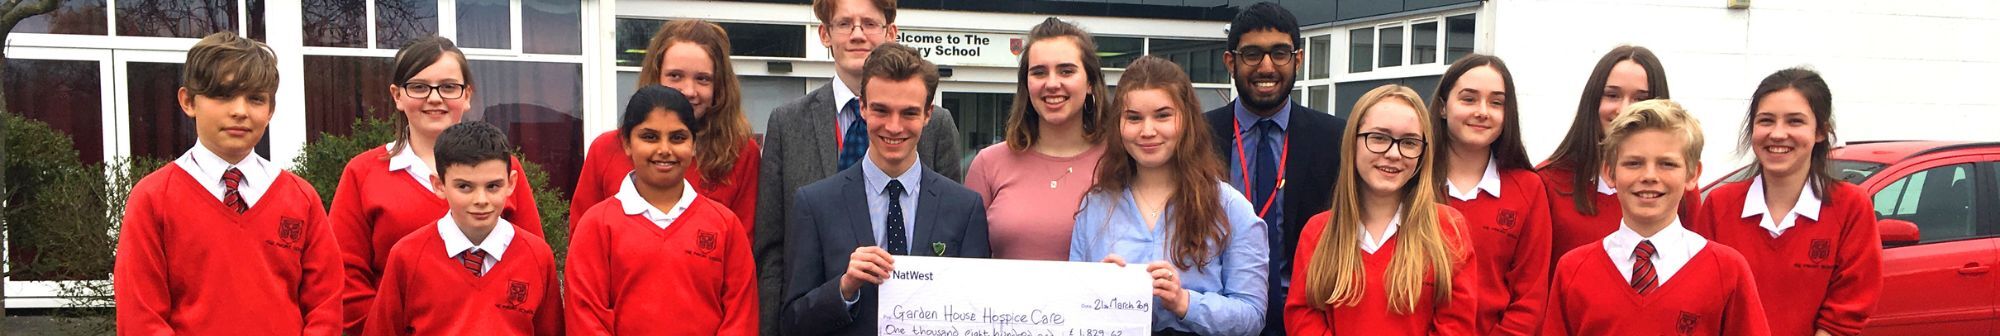 priory-school-students-standing-with-a-cheque